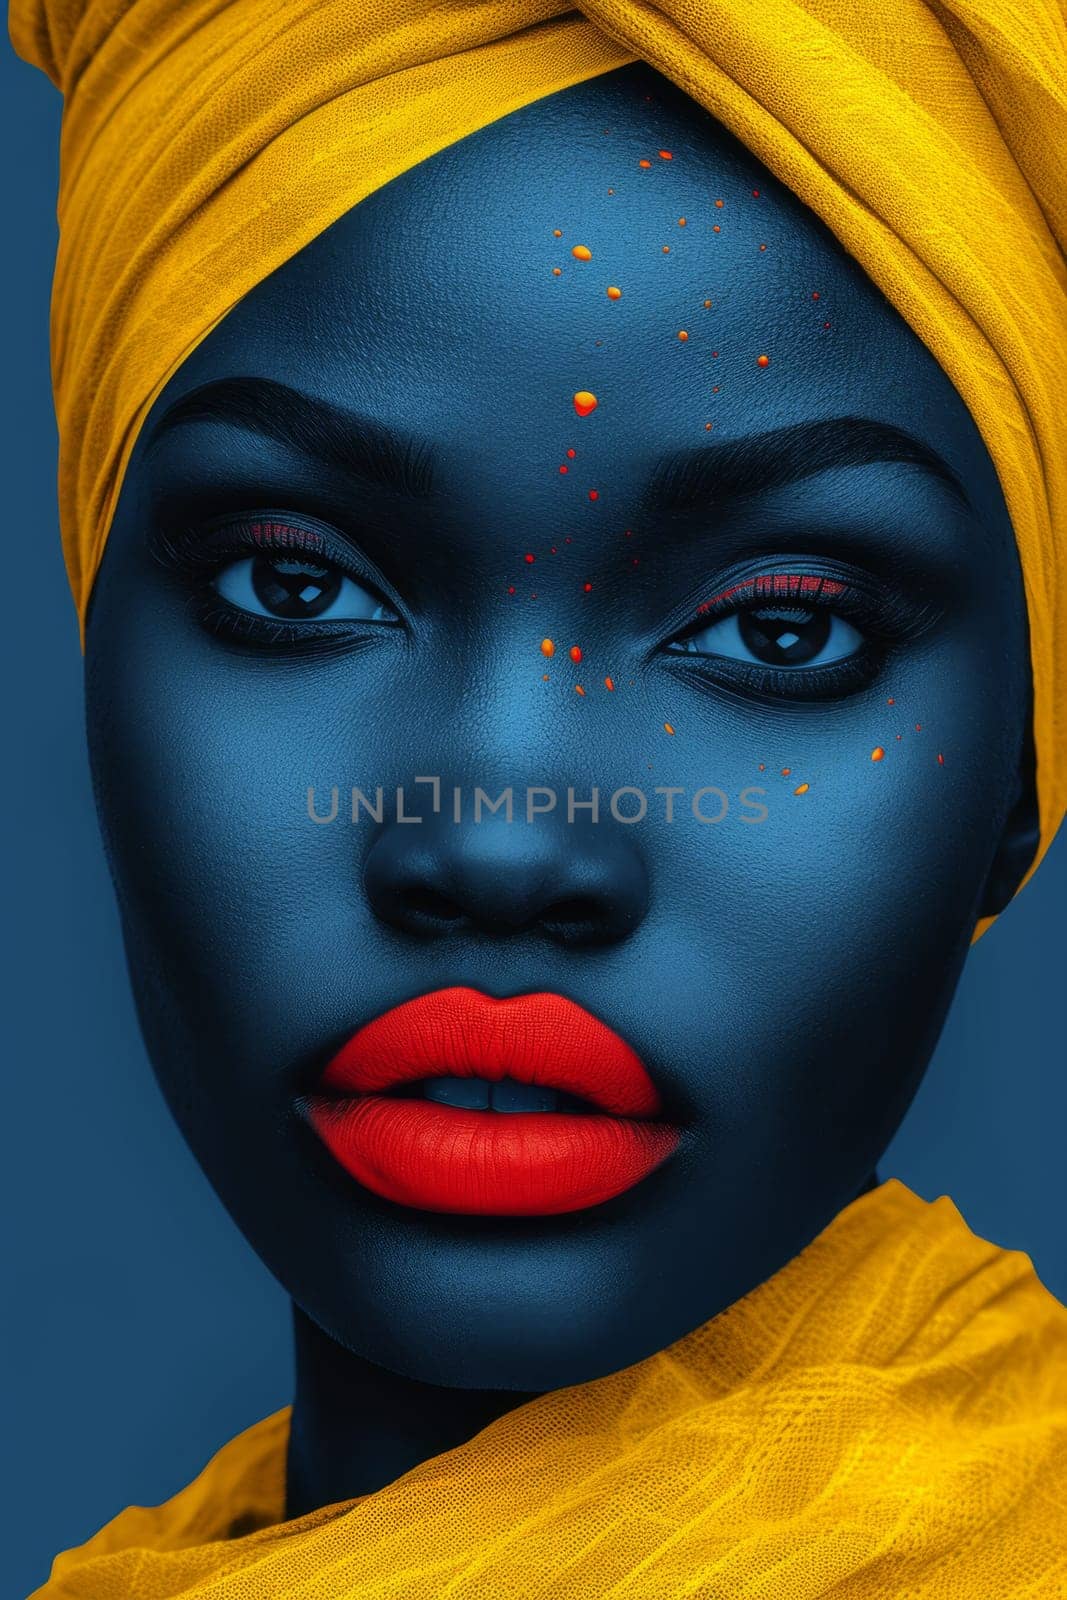 A close-up portrait of the face of a fashionable African woman in a colored headdress by Lobachad